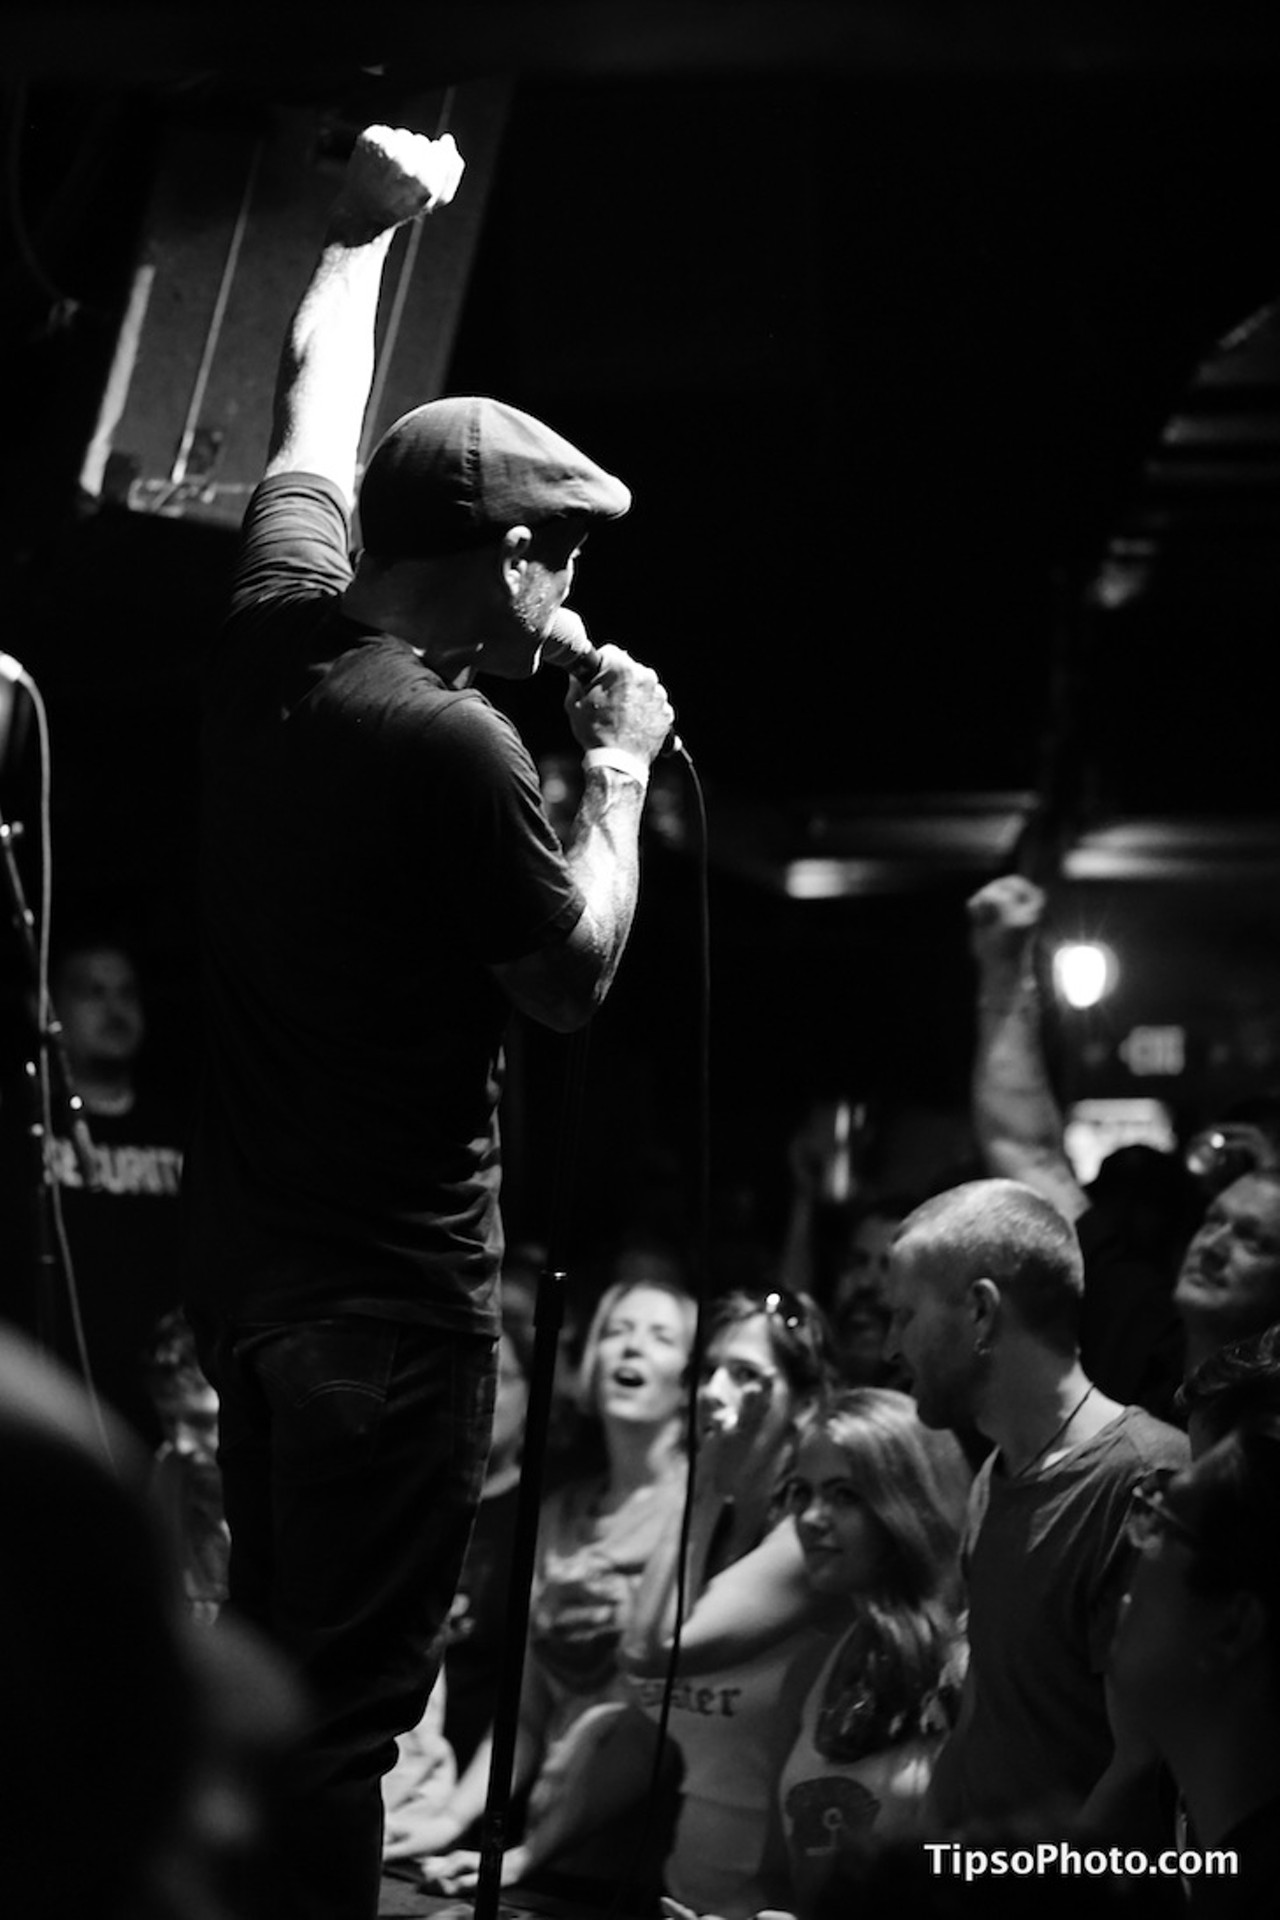 Photos from Face to Face and the Attack at Backbooth